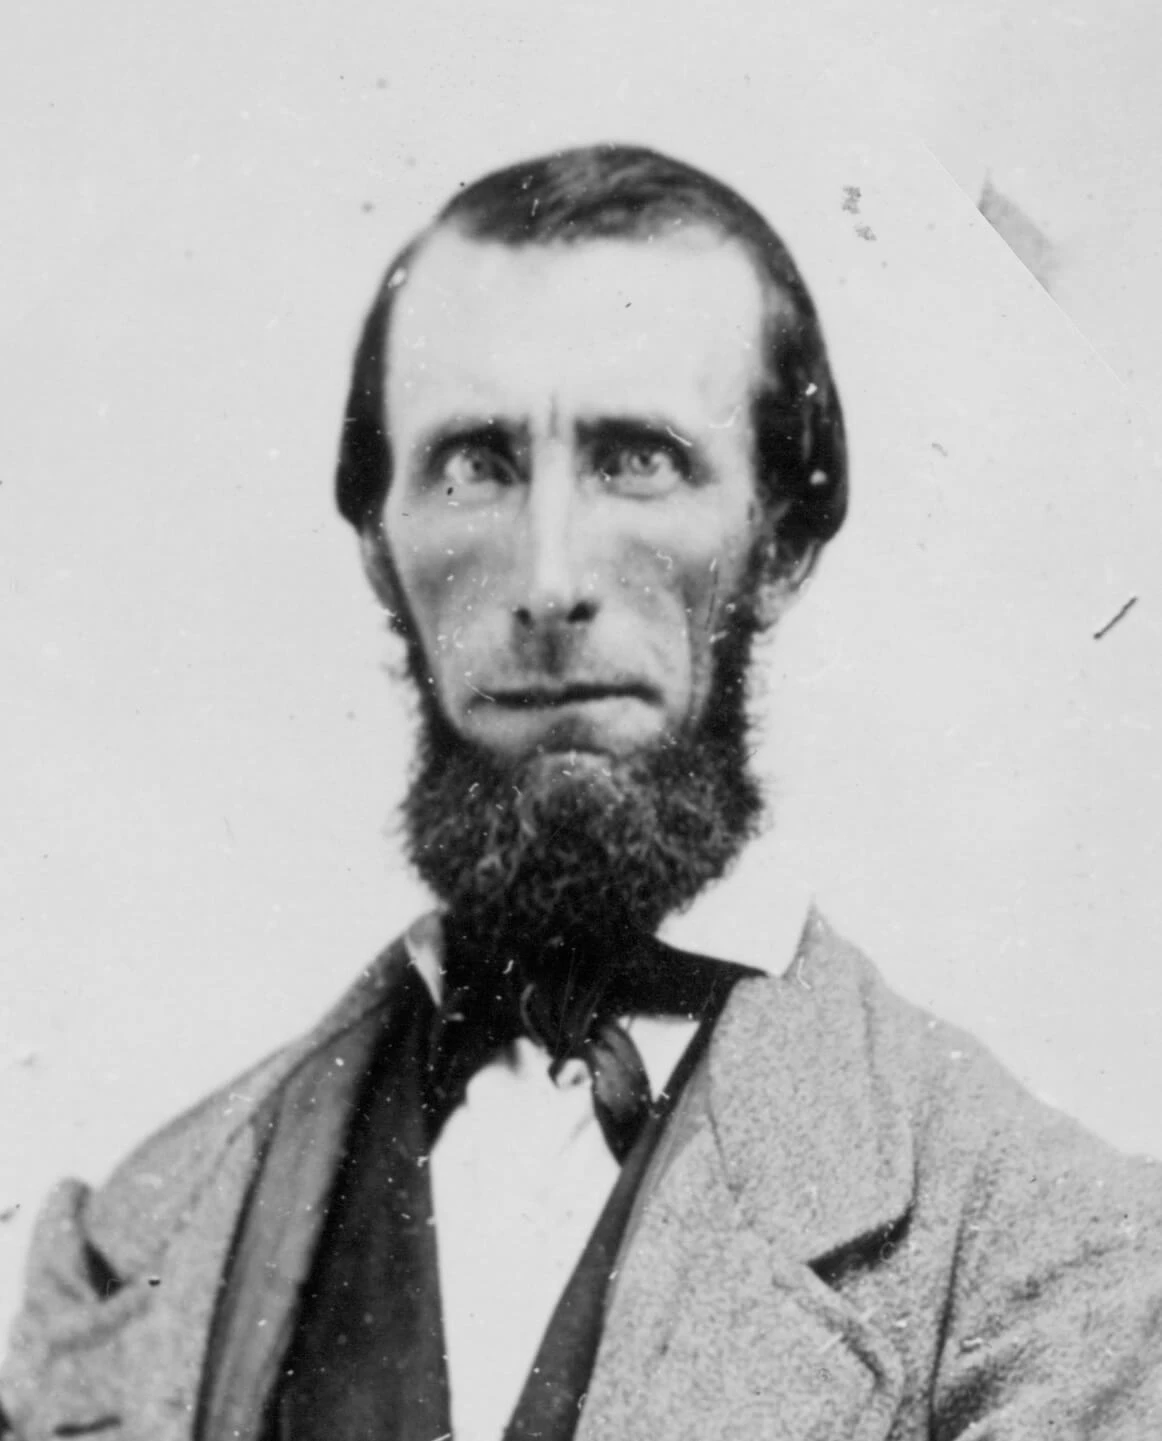 Portrait of a gaunt-faced man with a full beard & sideburns along with a receding hairline wearing a suit and tie.